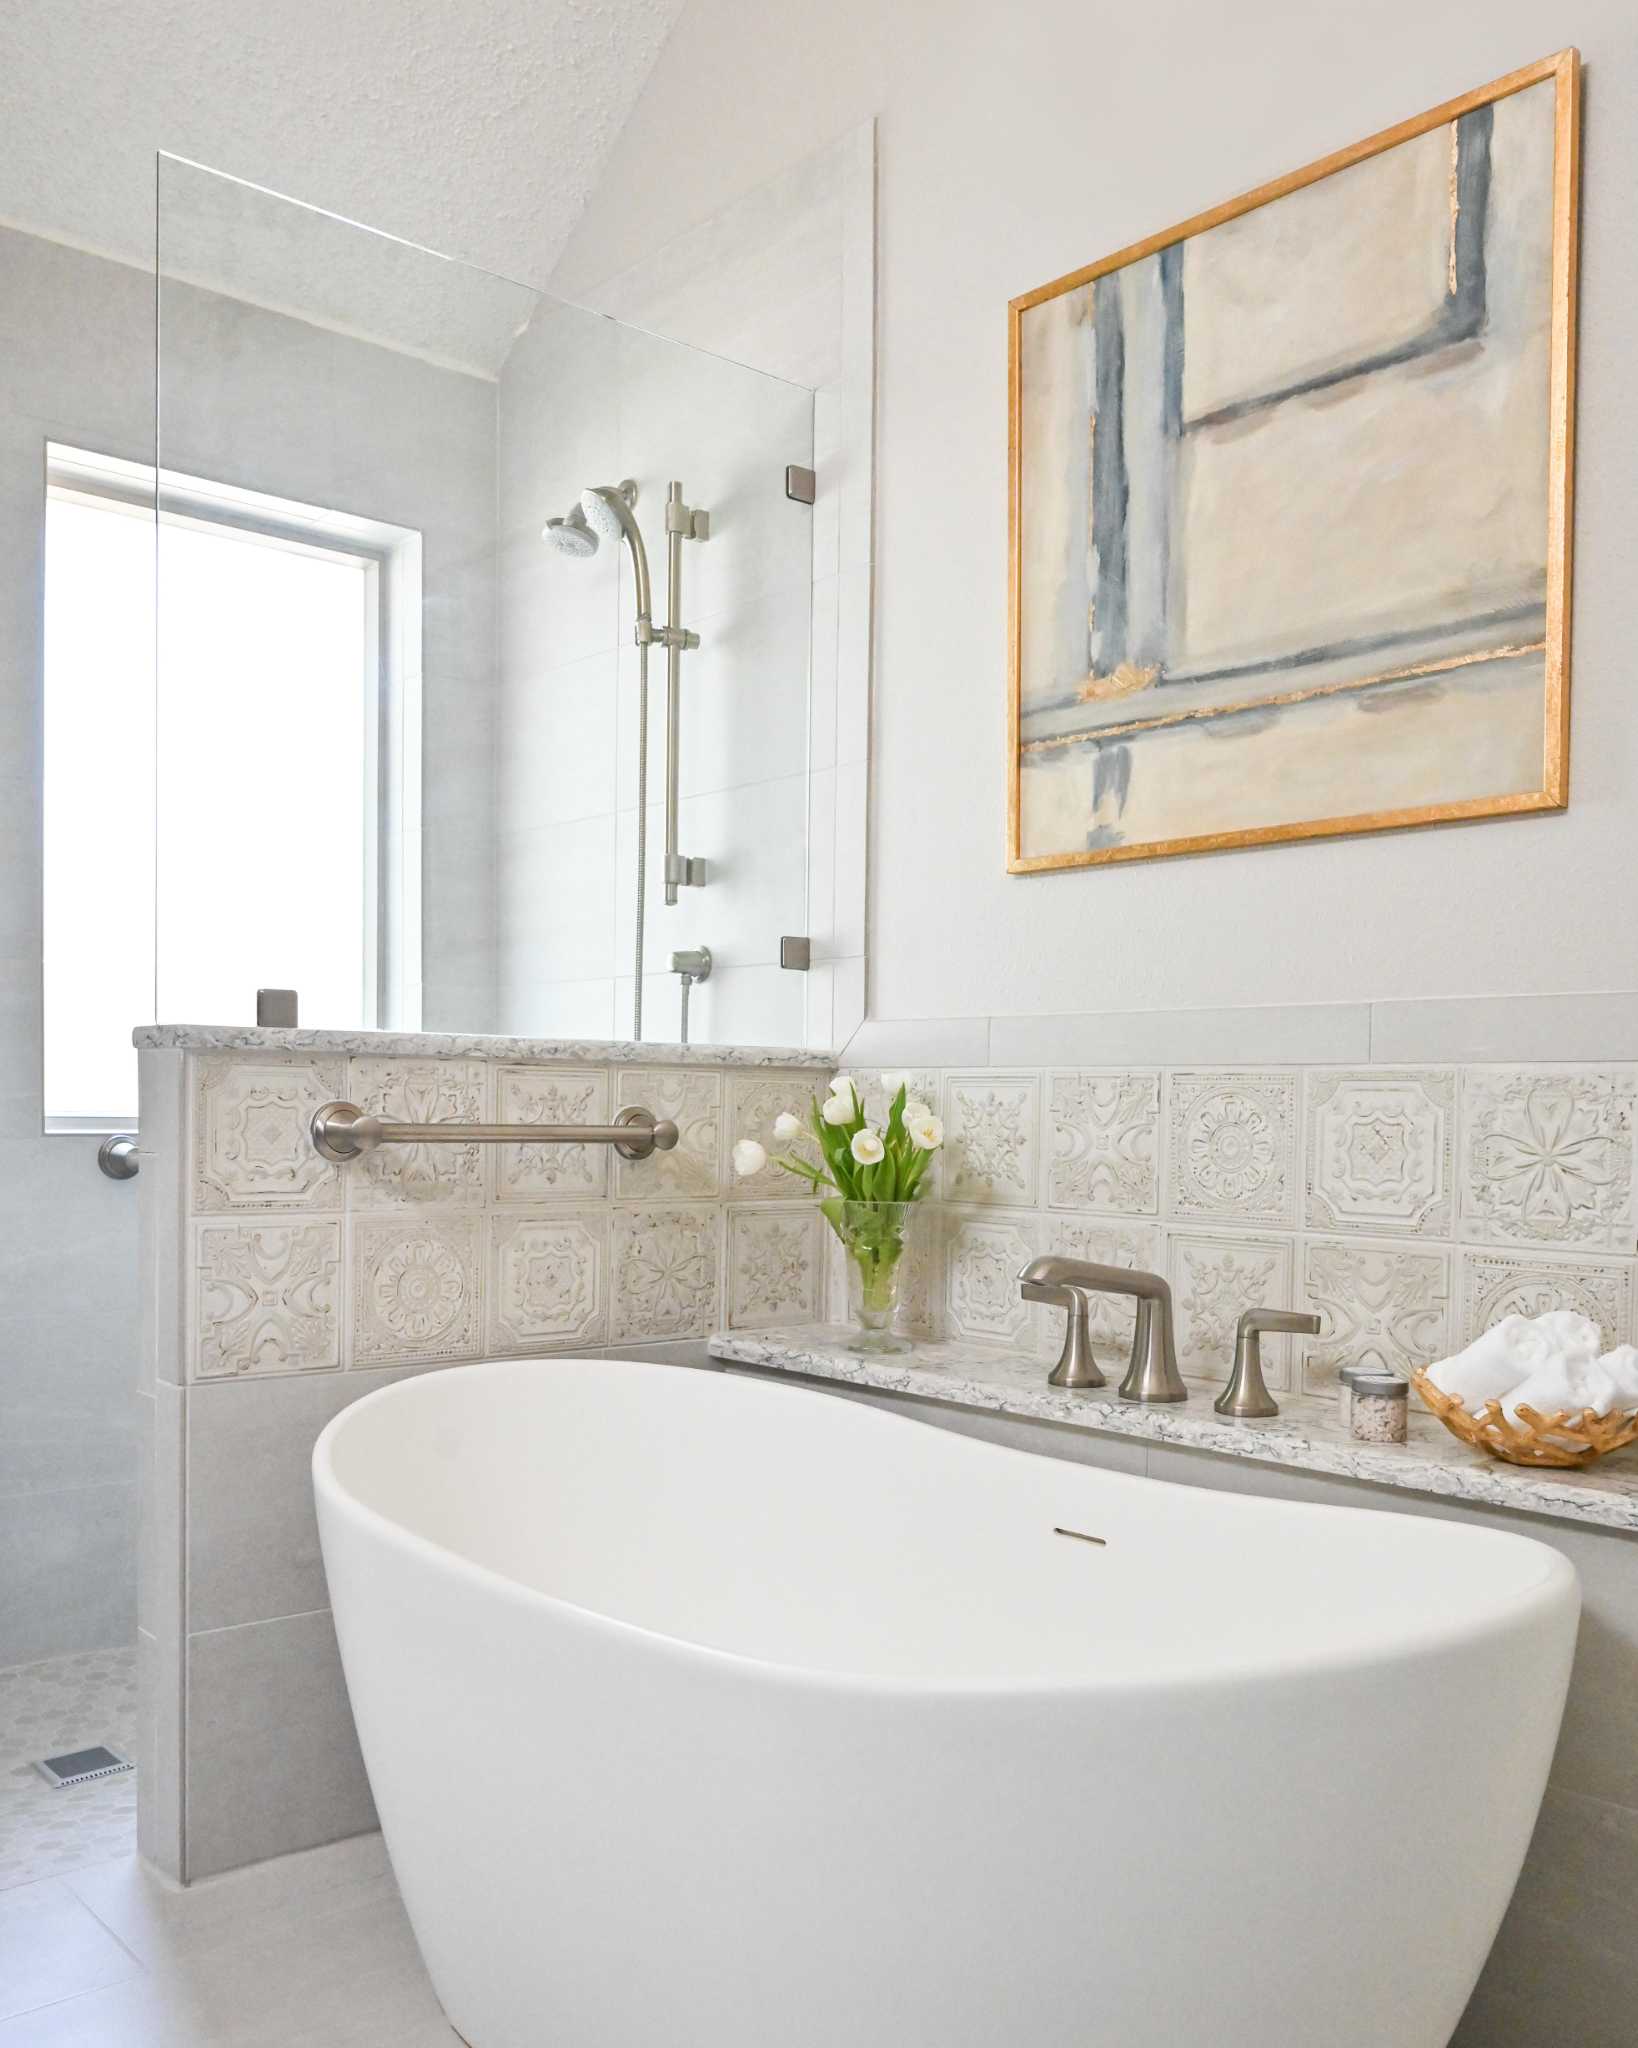 10 Bathtub Ideas That Will Make You Never Want To Leave Home — Heather  Hungeling Design